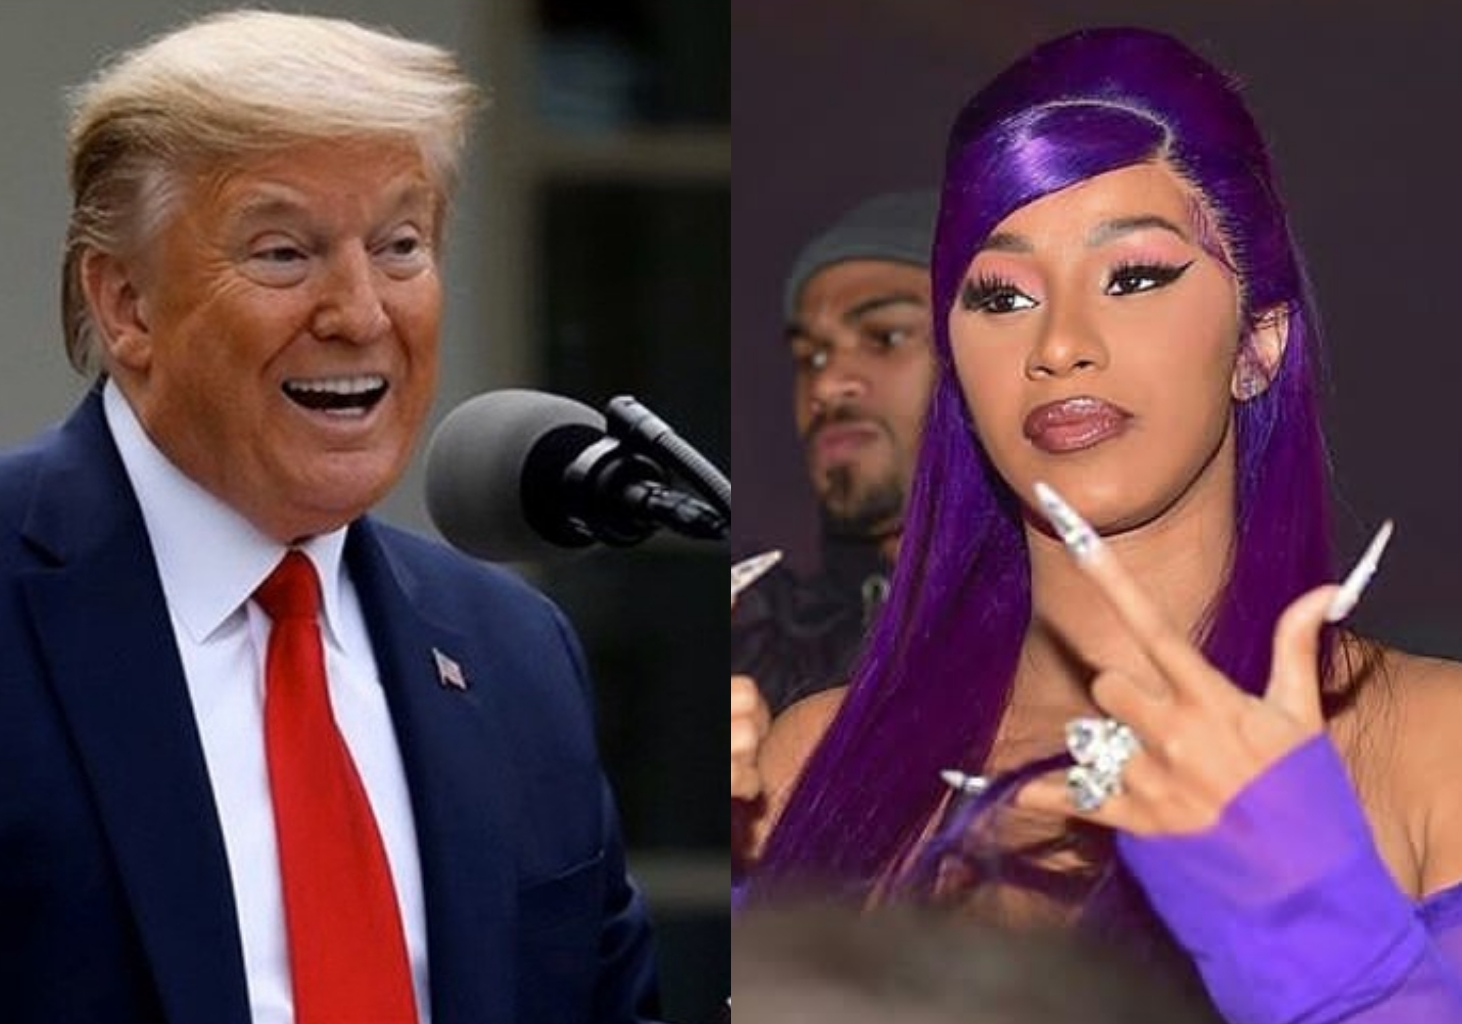 "They put money before our health" – Cardi B calls out Donald Trump (Video)